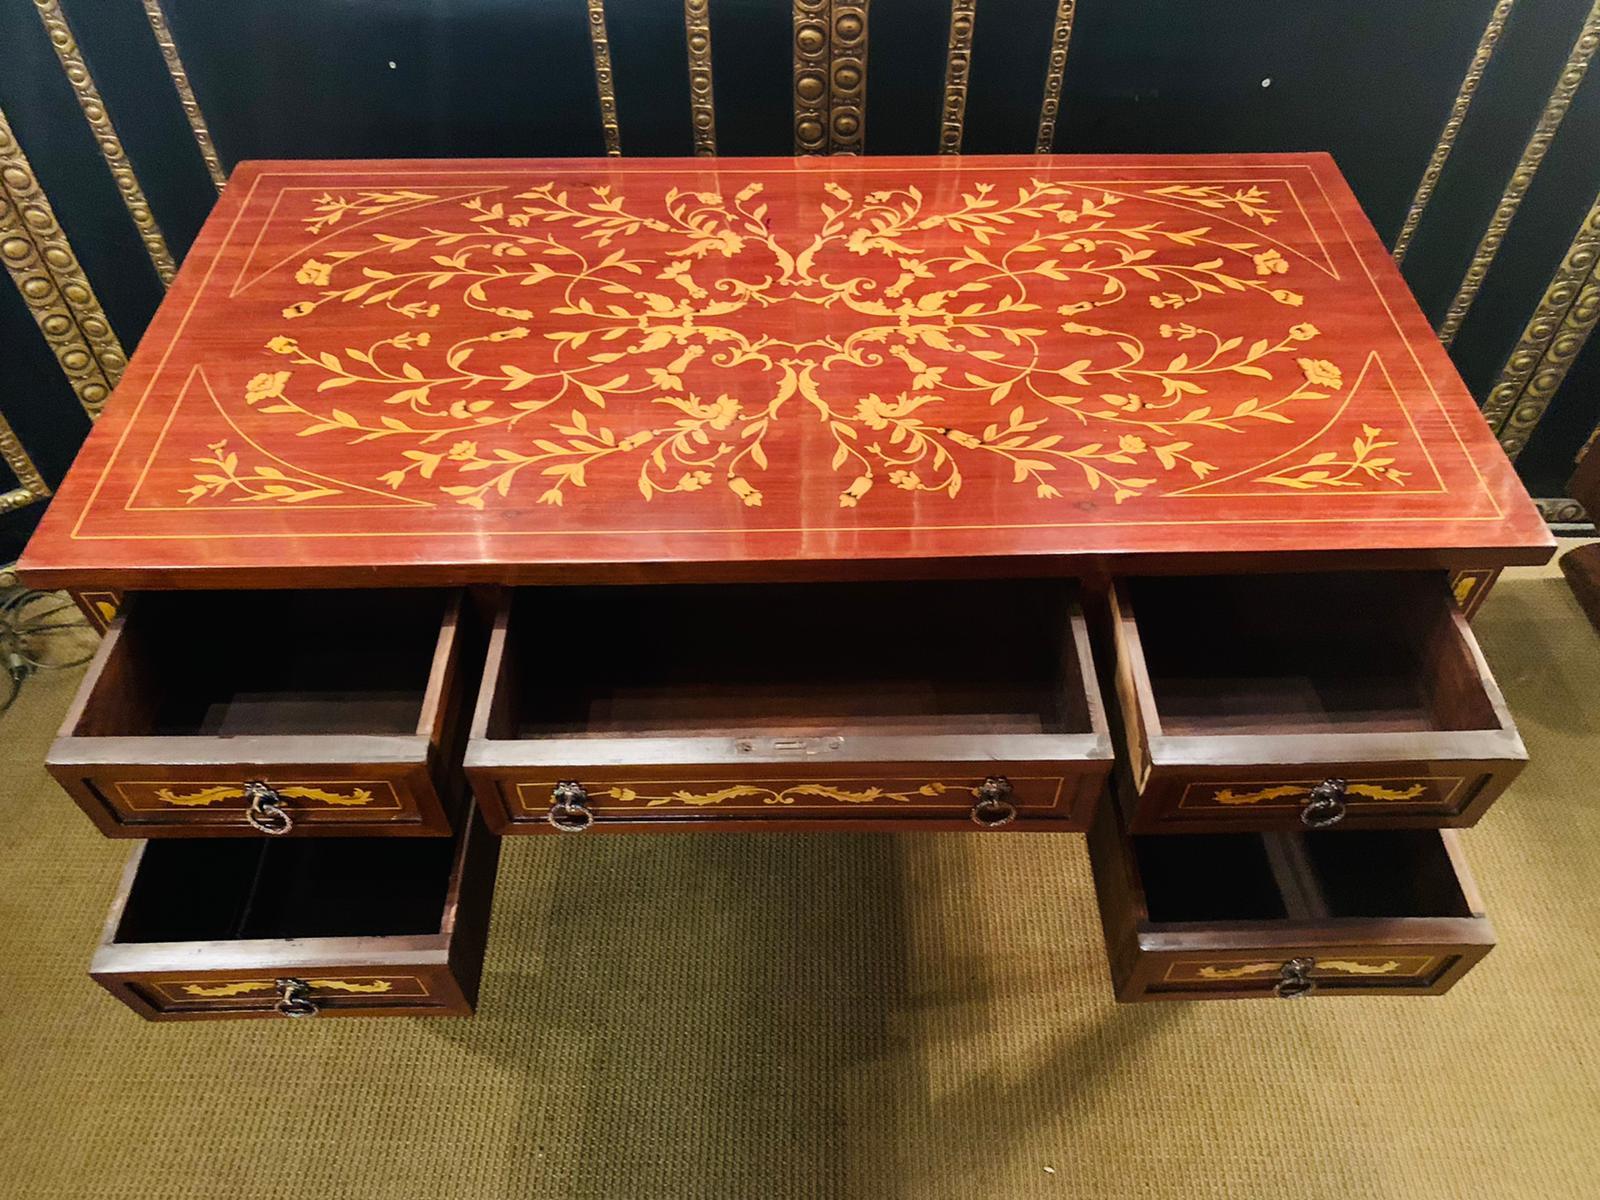 20th Century Classic Desk in the antique Style of Classicism with Inlays  2